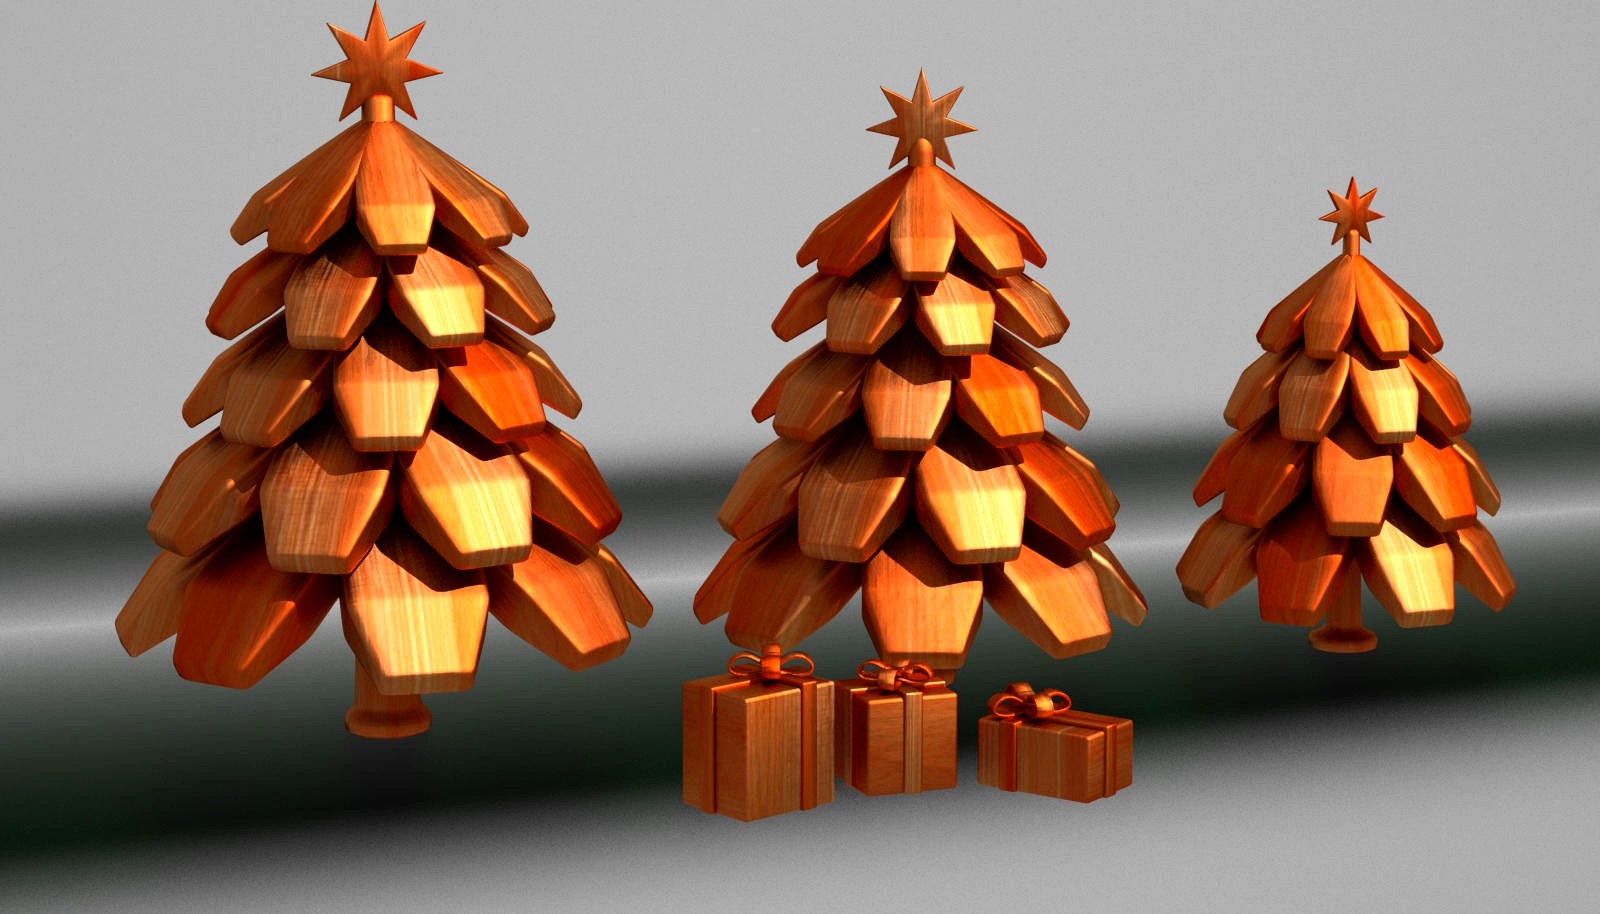 Wooden Toy Christmas Trees